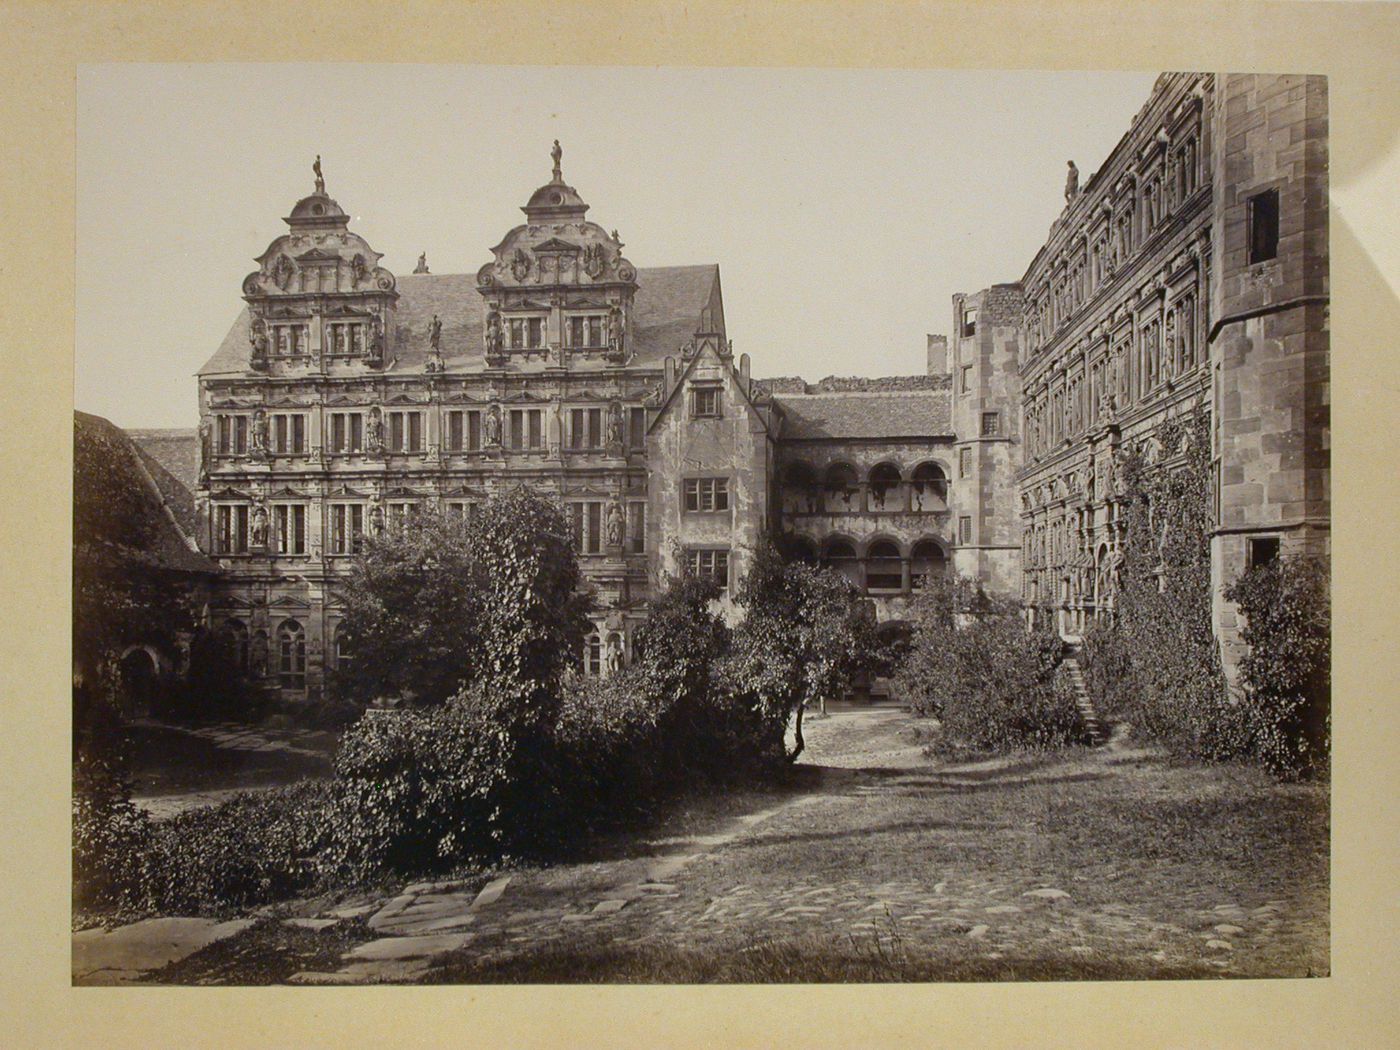 Late Renaissance building partially in ruin with courtyard, Heidelberg [?], Germany